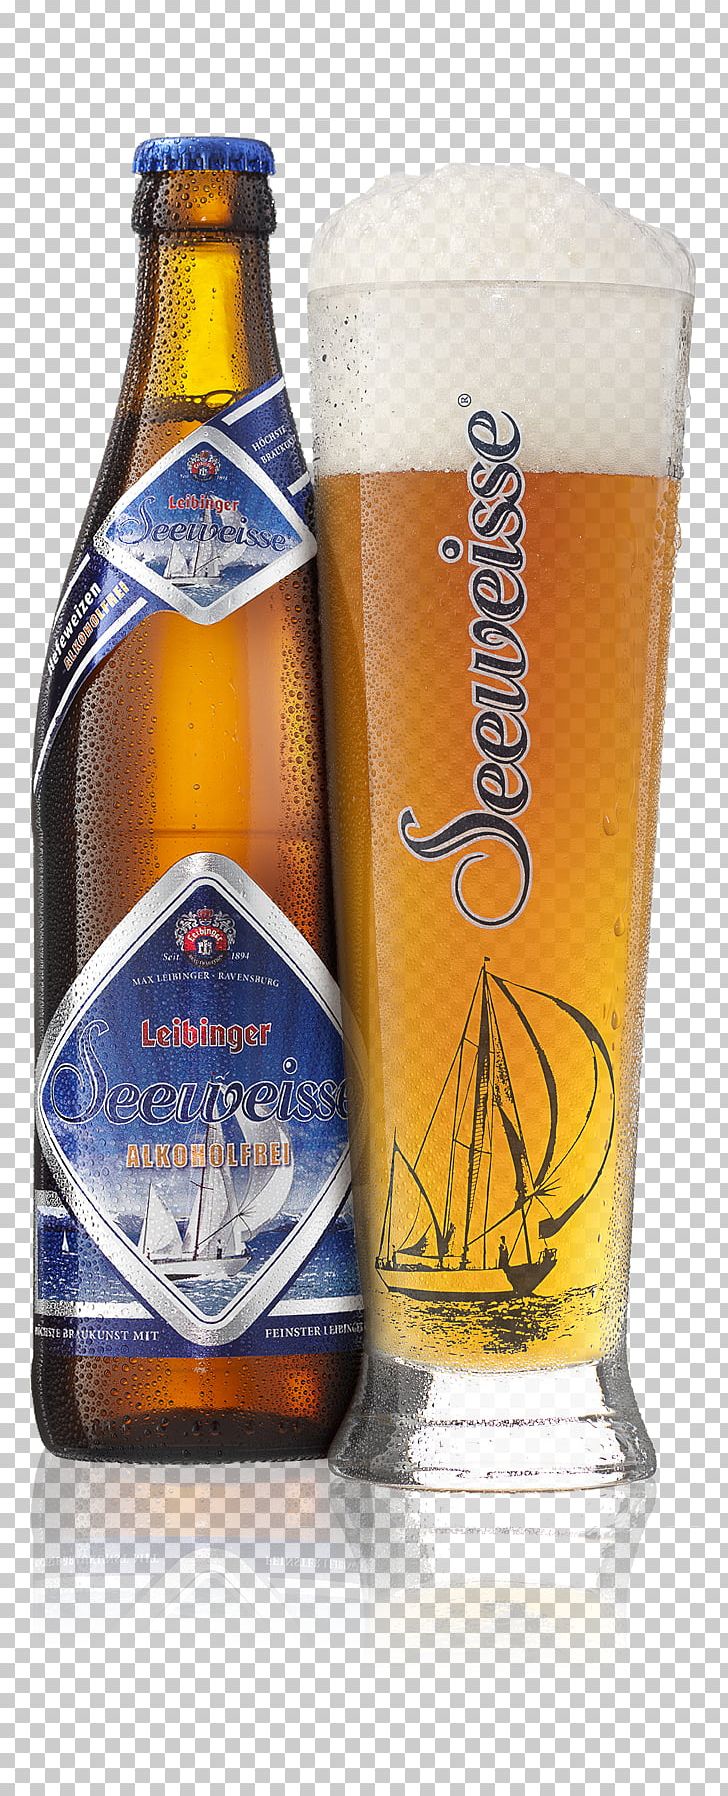 Wheat Beer Brauerei Max Leibinger GmbH Beer Cocktail Ale PNG, Clipart, Alcoholic Beverage, Ale, Alkoholfrei, Barware, Bavaria Nonalcoholic Beer Free PNG Download